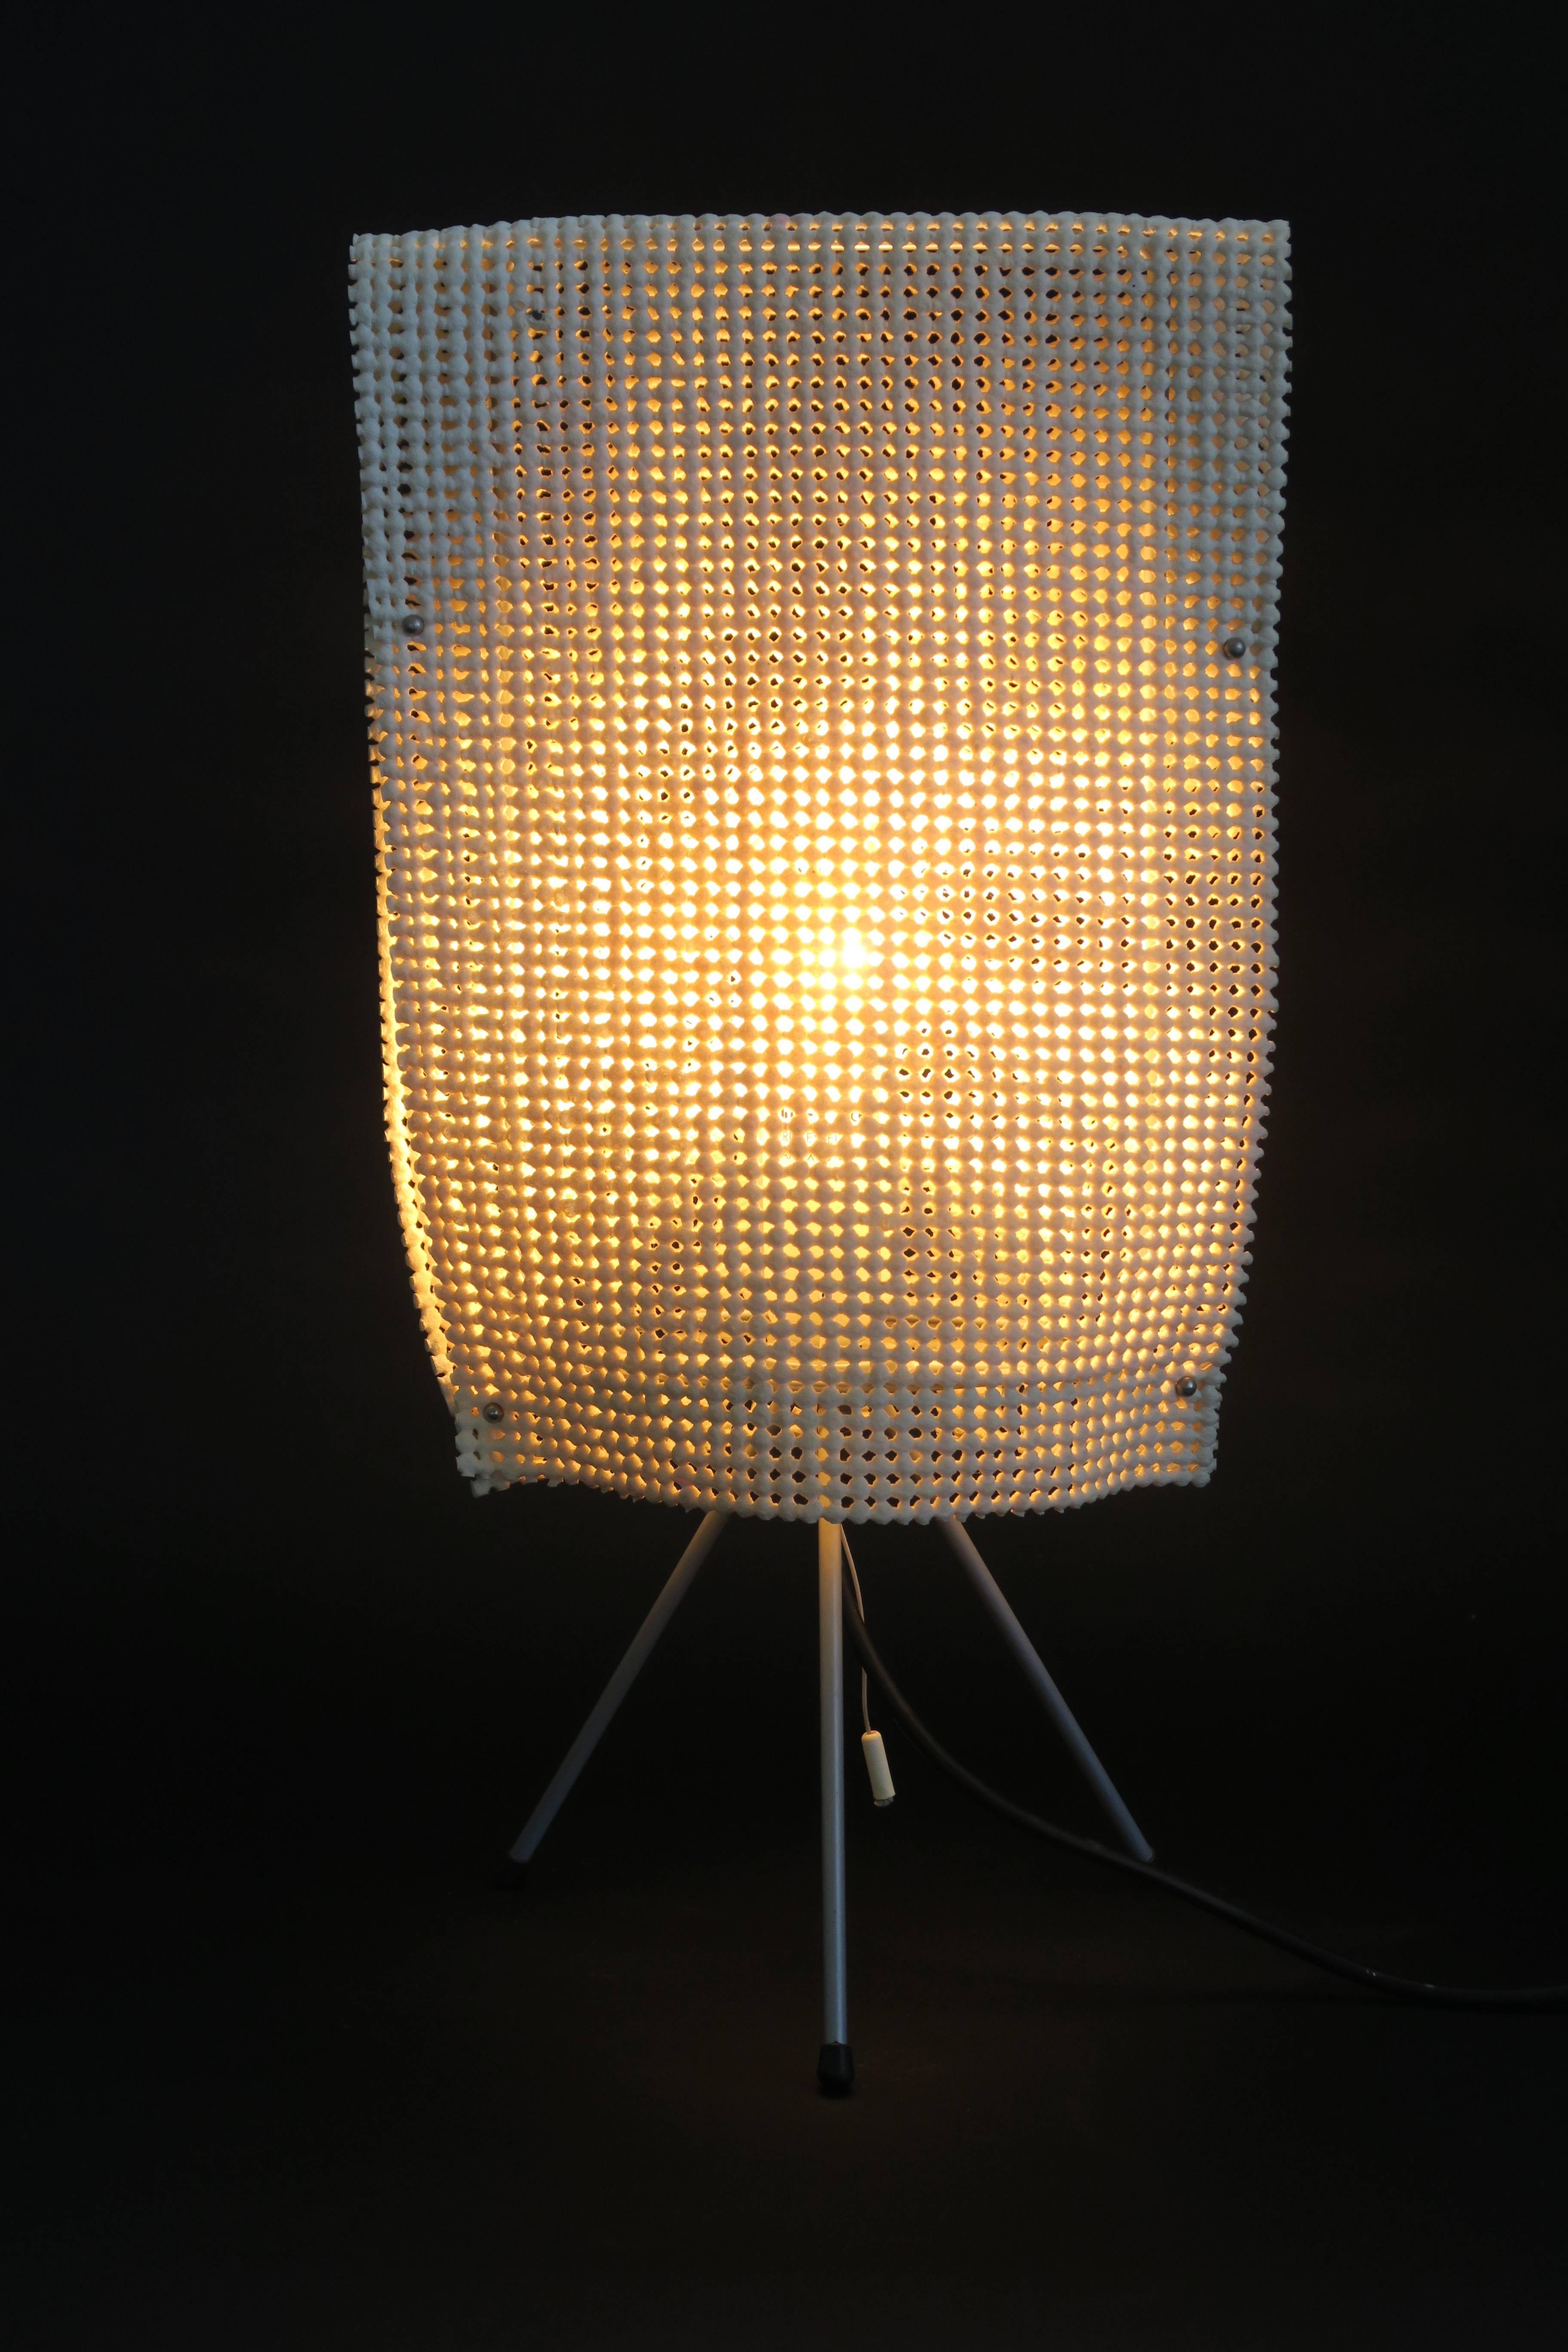 Table lamp 'Estela'. Design by Fernando and Humberto Campana (1997). Manufactured by O-Luce. Grey lacquered metal structure, lampshade made of tobacco brown rubber.